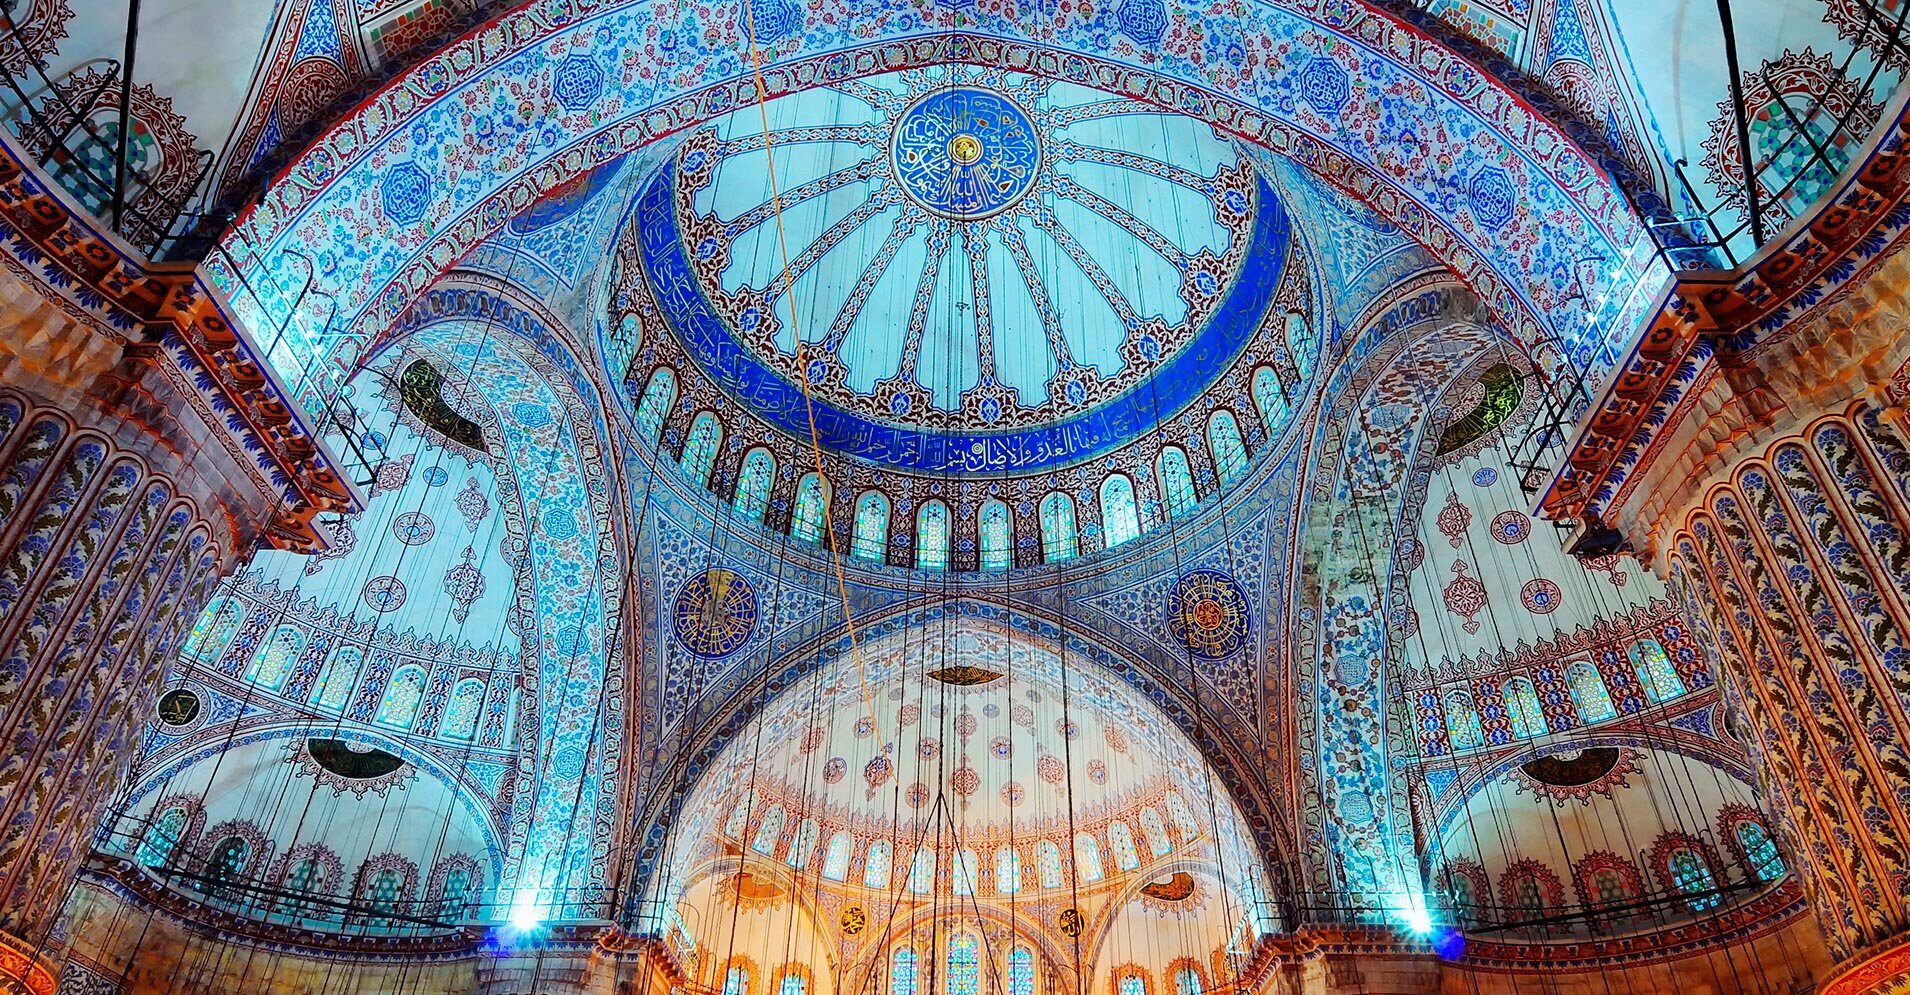 The Historical Blue Mosque or Sultan Ahmet Cami of istanbul